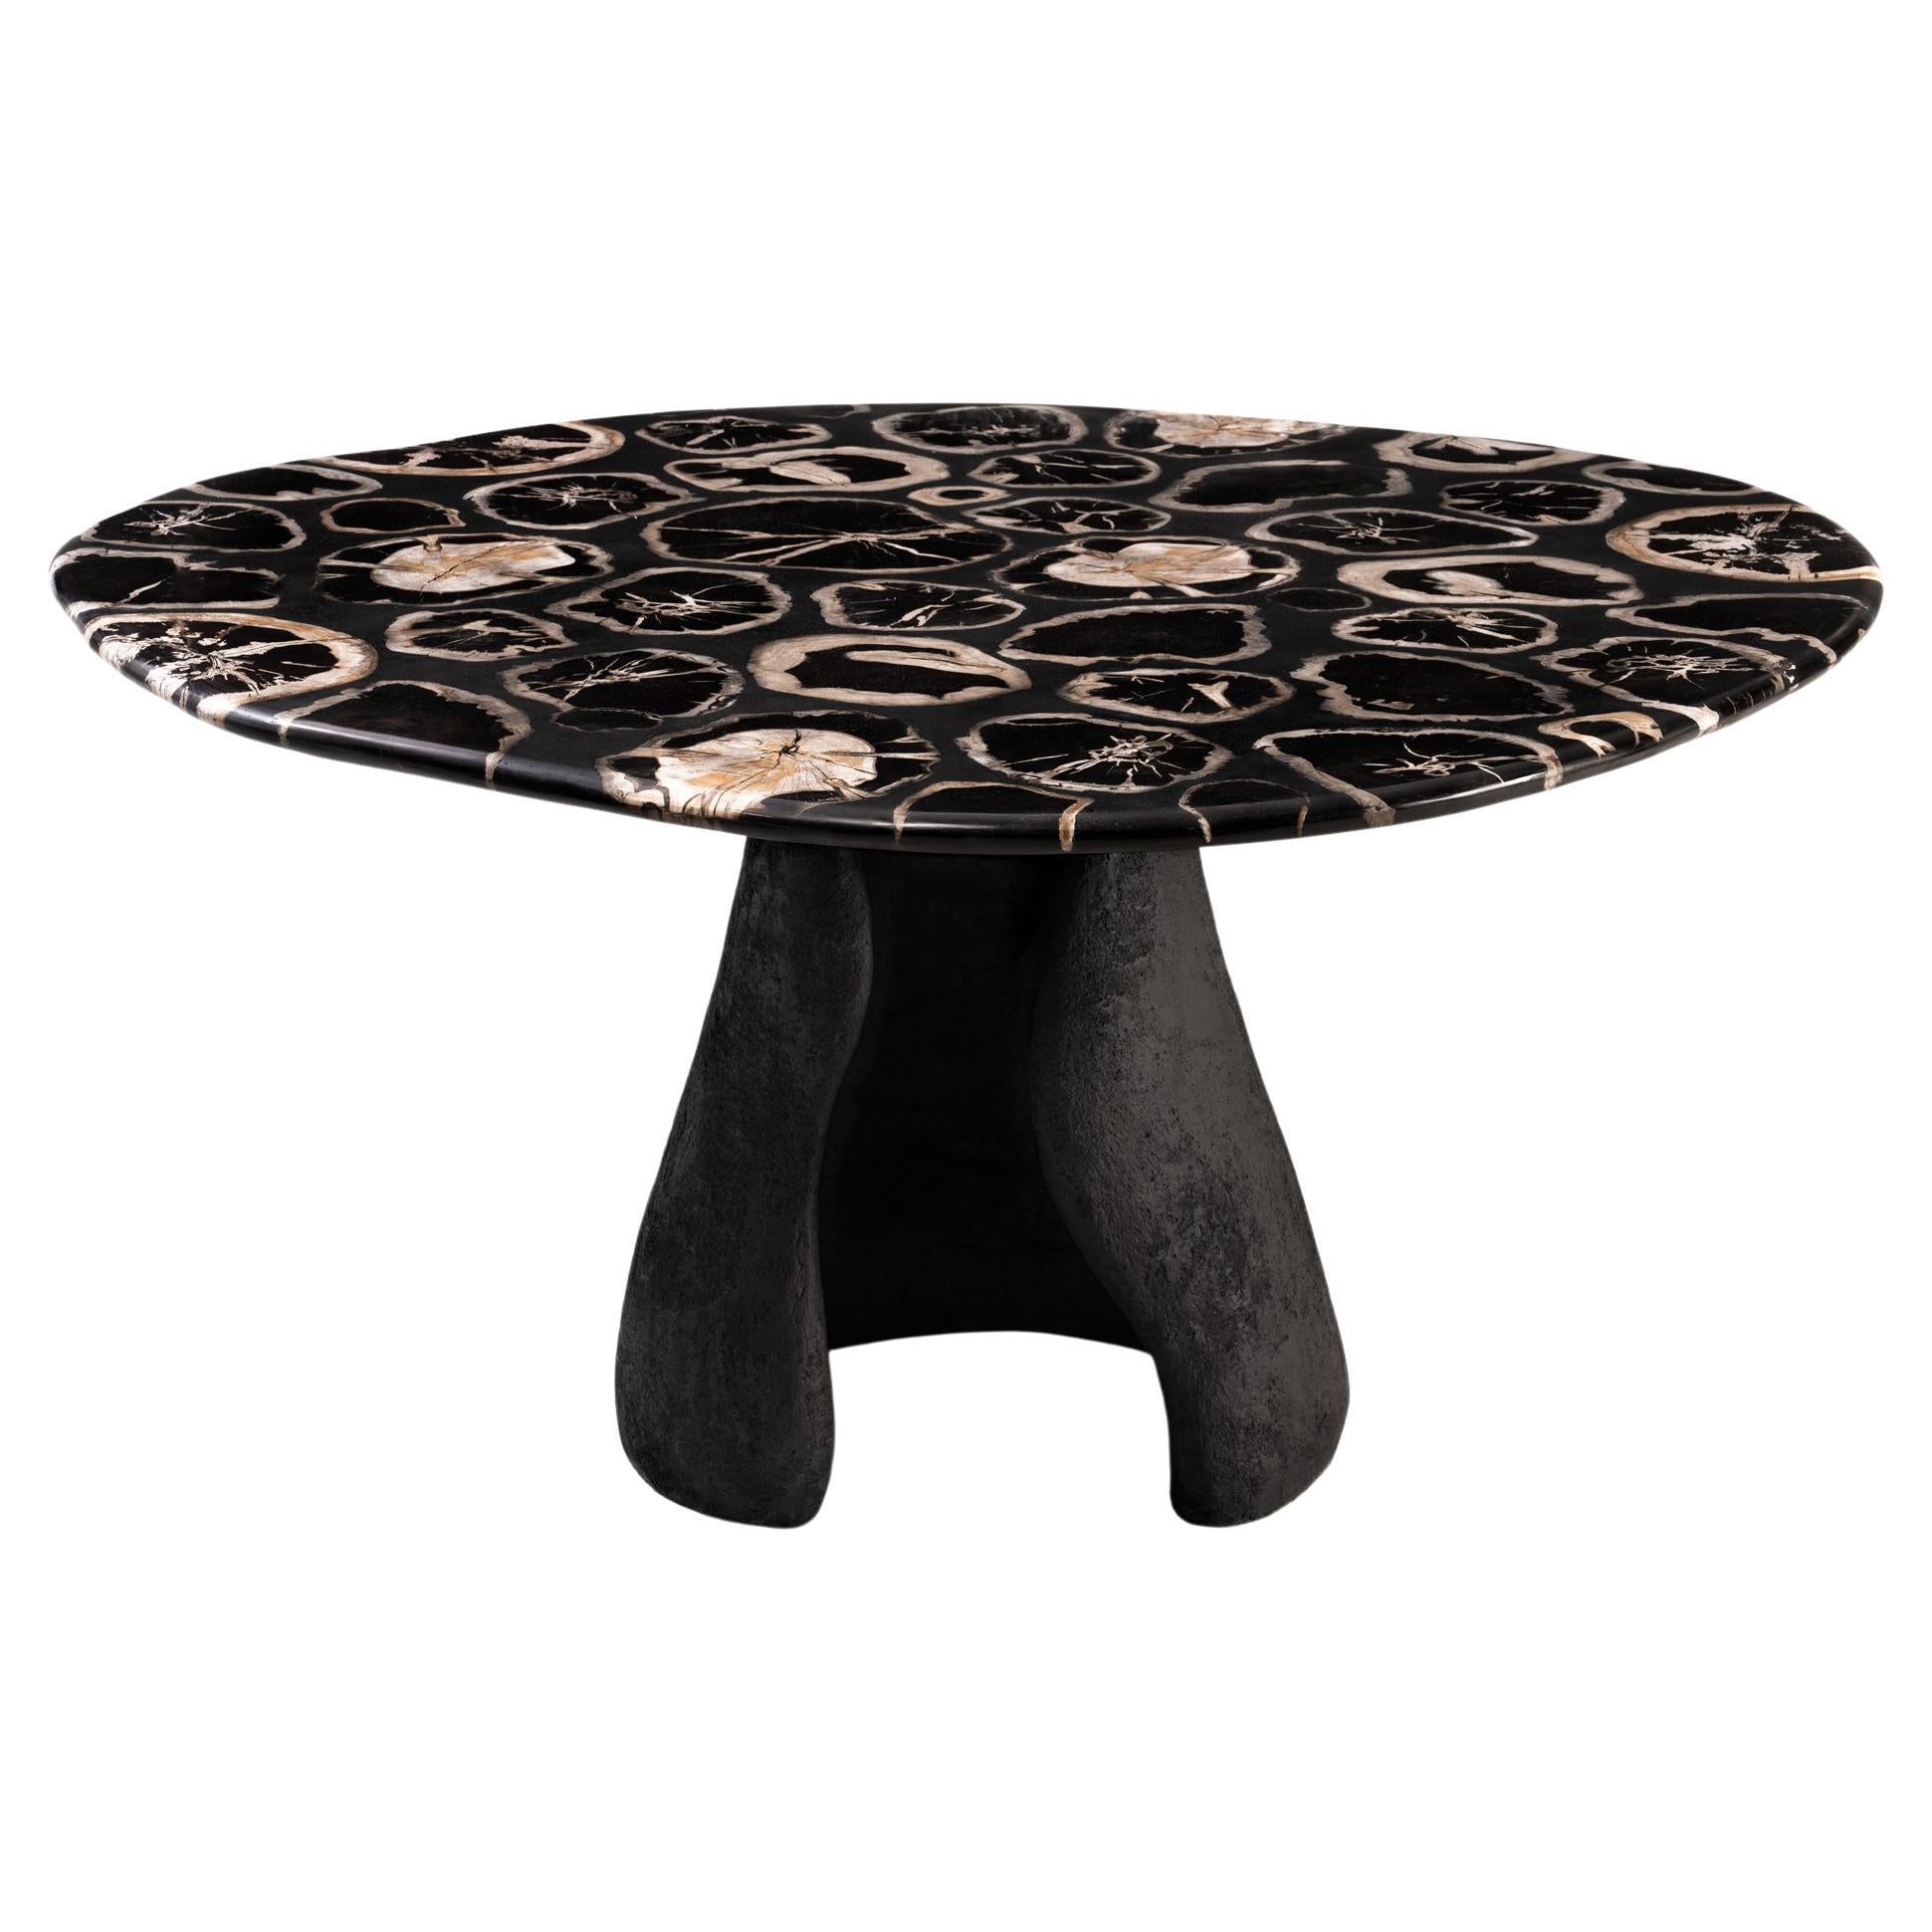 True Grit • Sculptural Petrified Wood Dining Table by Odditi